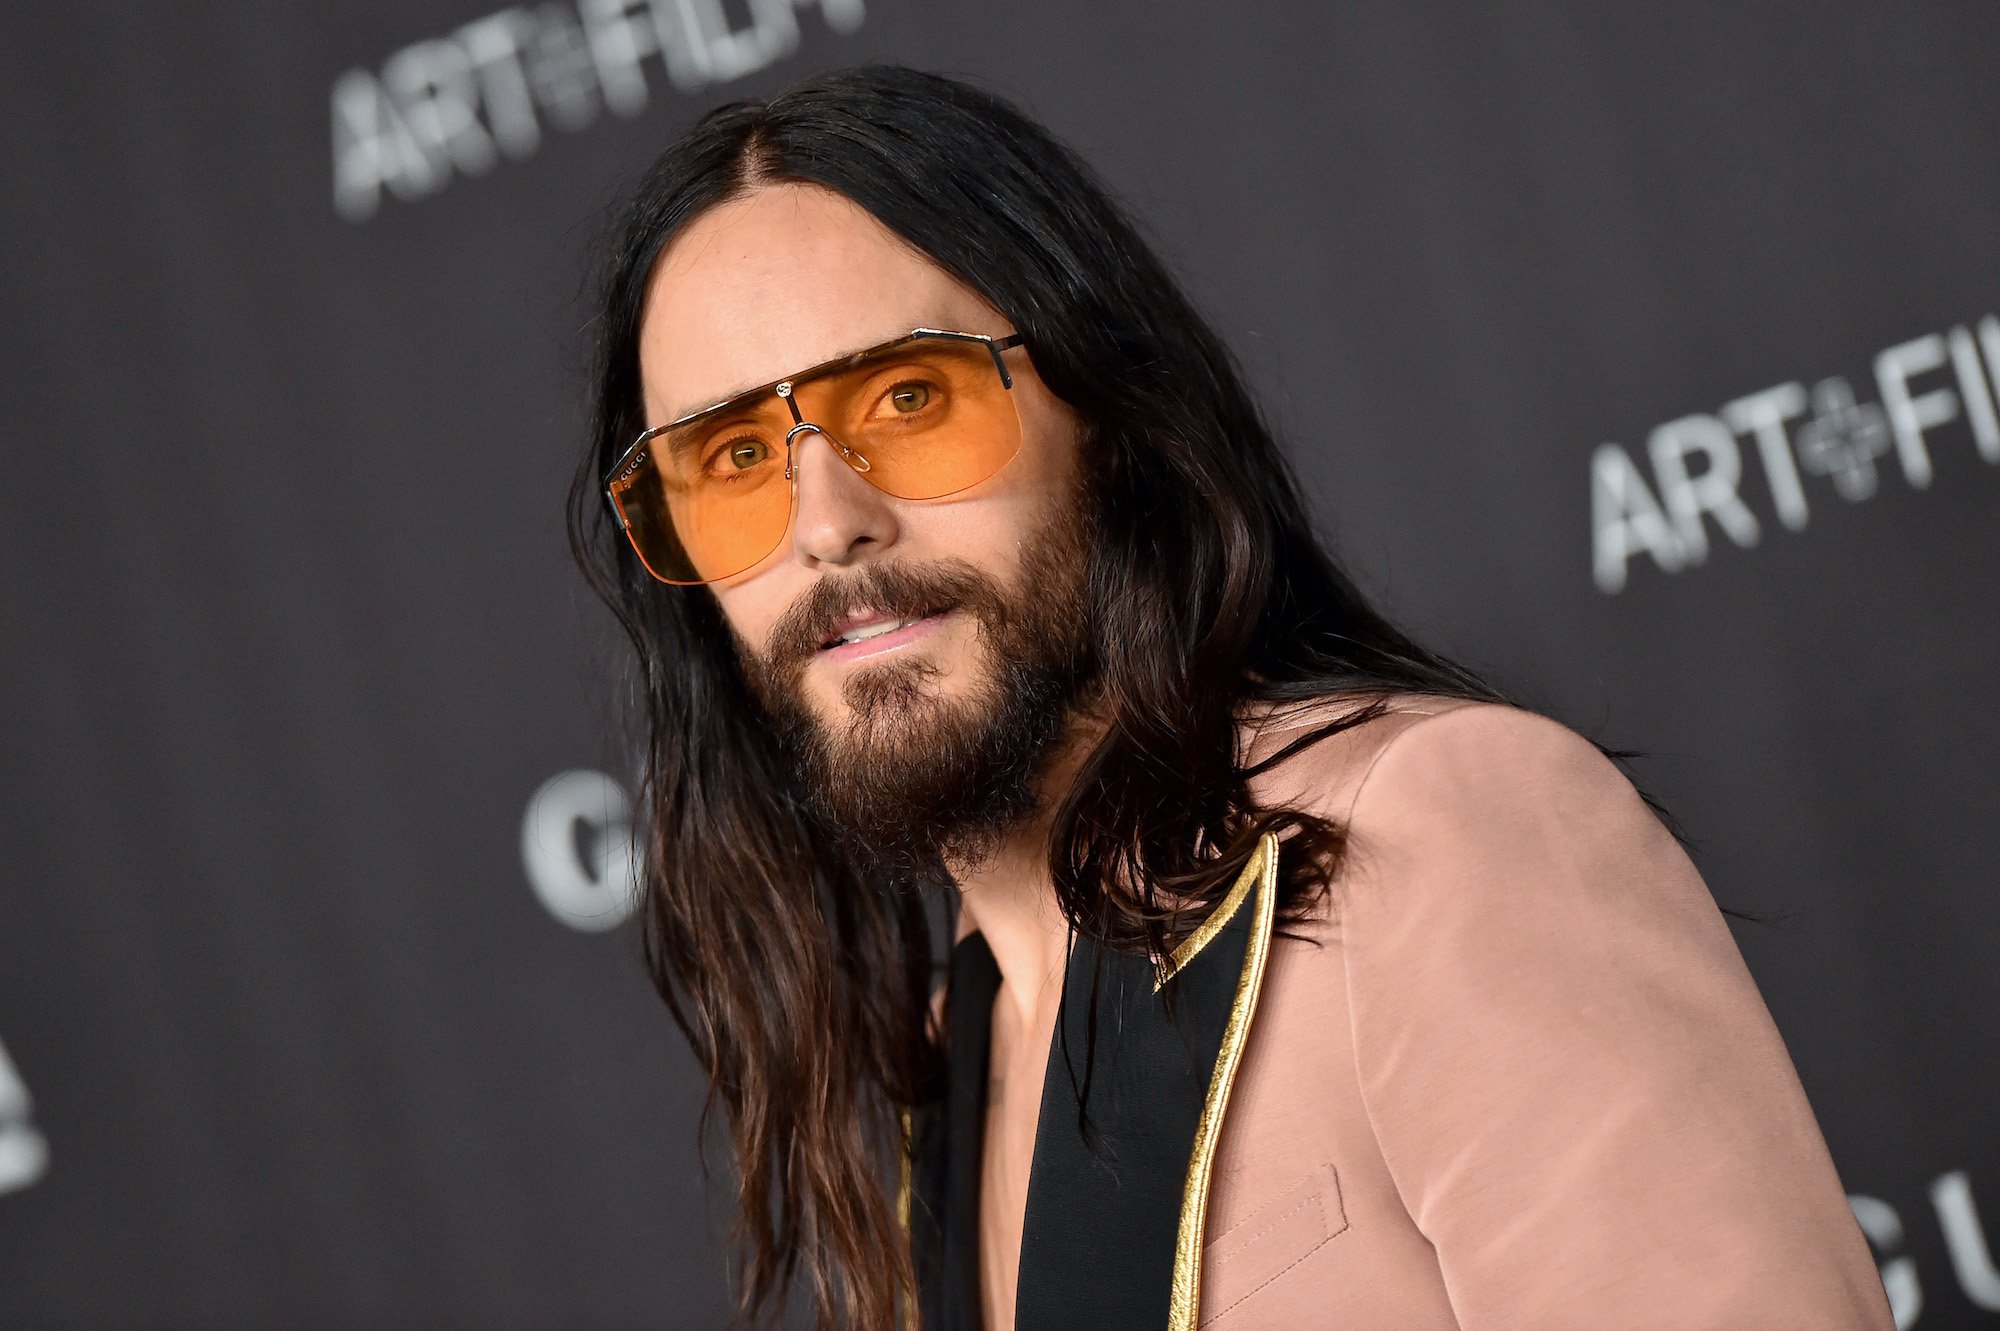 Jared Leto Once Got a Severed Ear From a Fan: ‘I Poked a Hole In It and Wore It as a Necklace!’